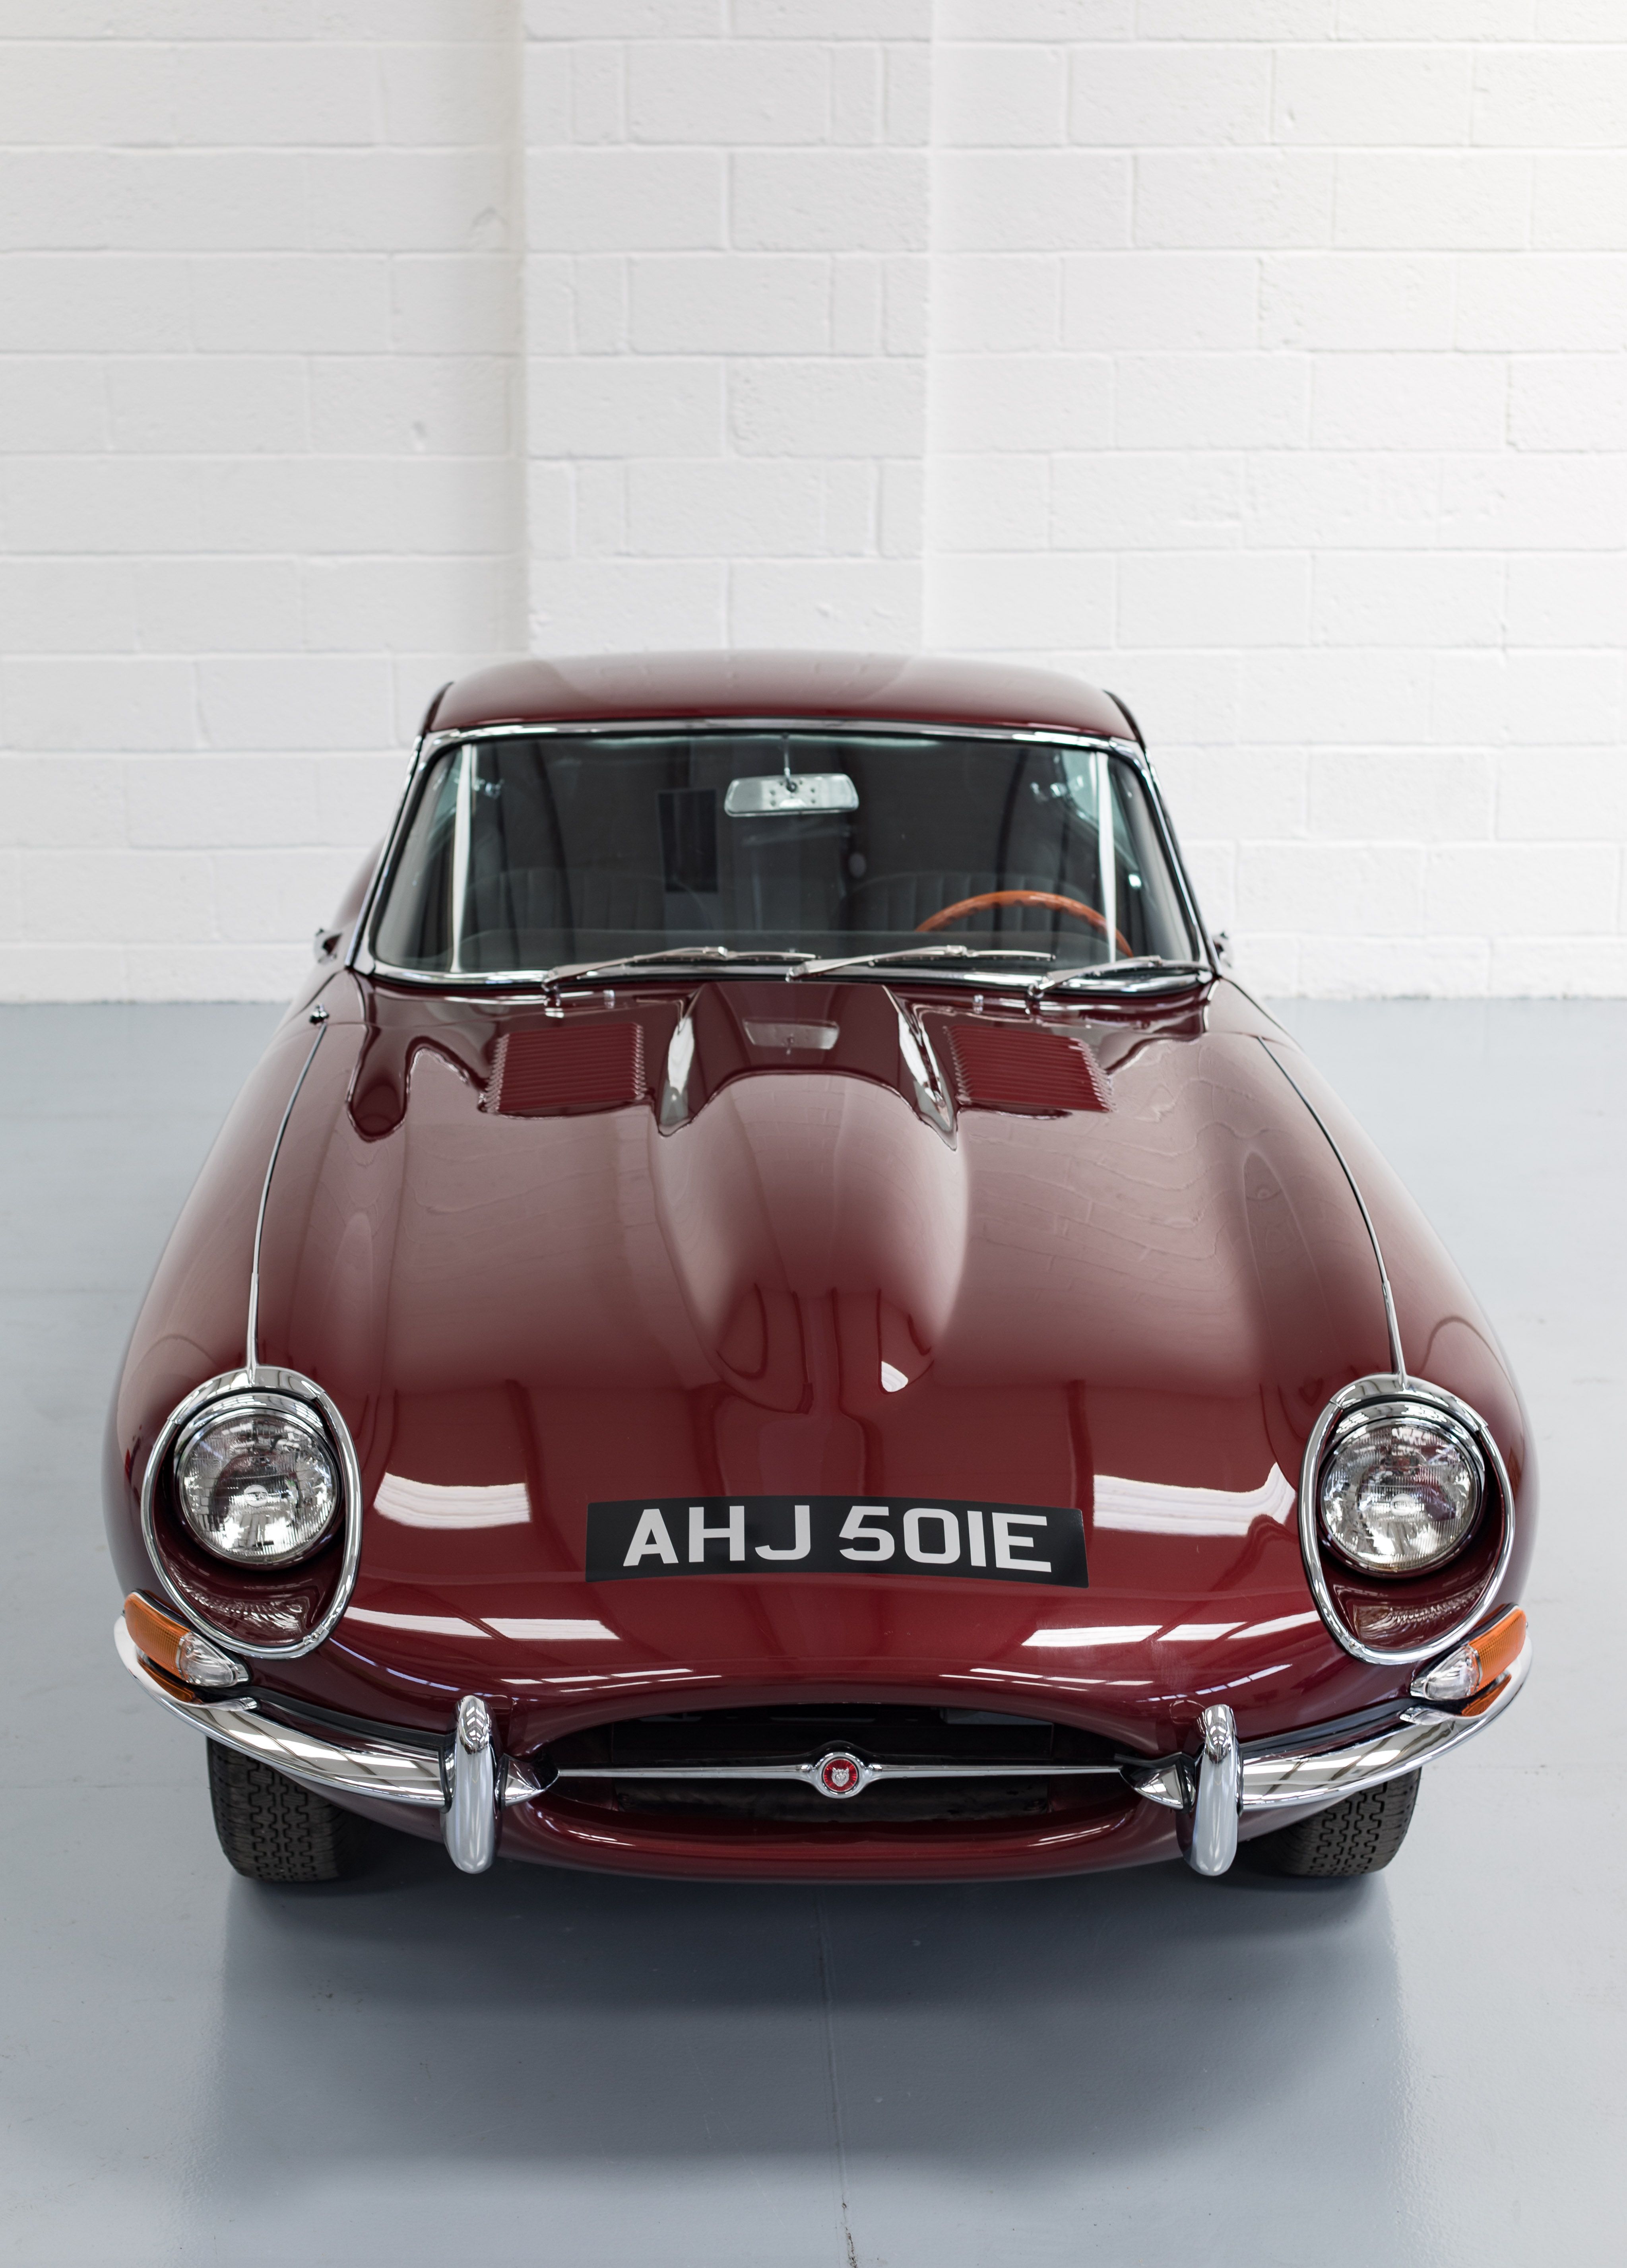 1967 Jaguar E-type Series 1¼ Coupe converted by Electrogenic